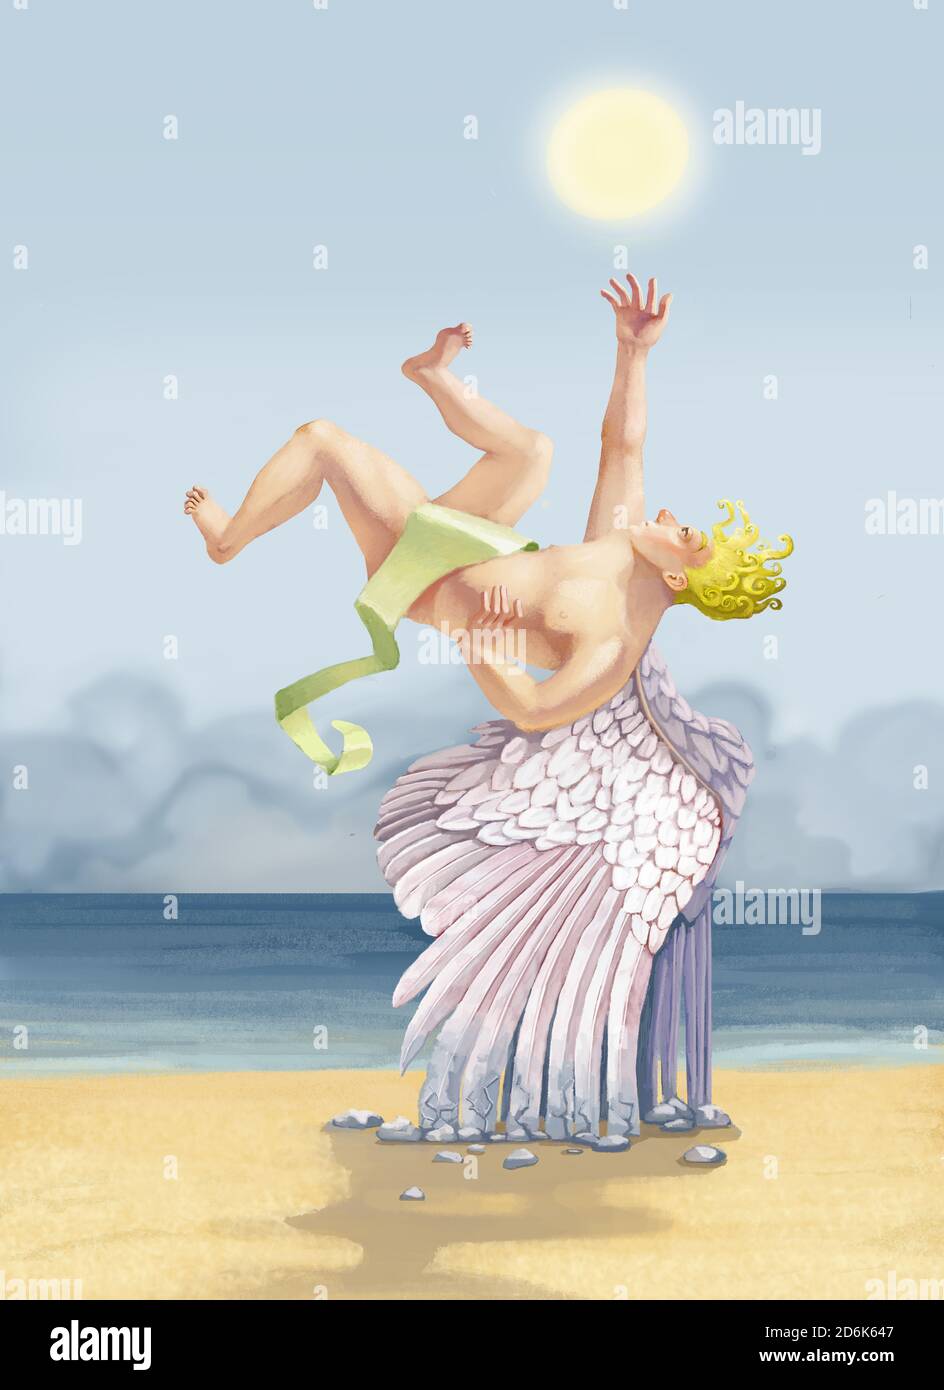 icarus's wings turn to stone dragging the boy to the beach broken dreams metapho surreal crypto art Stock Photo